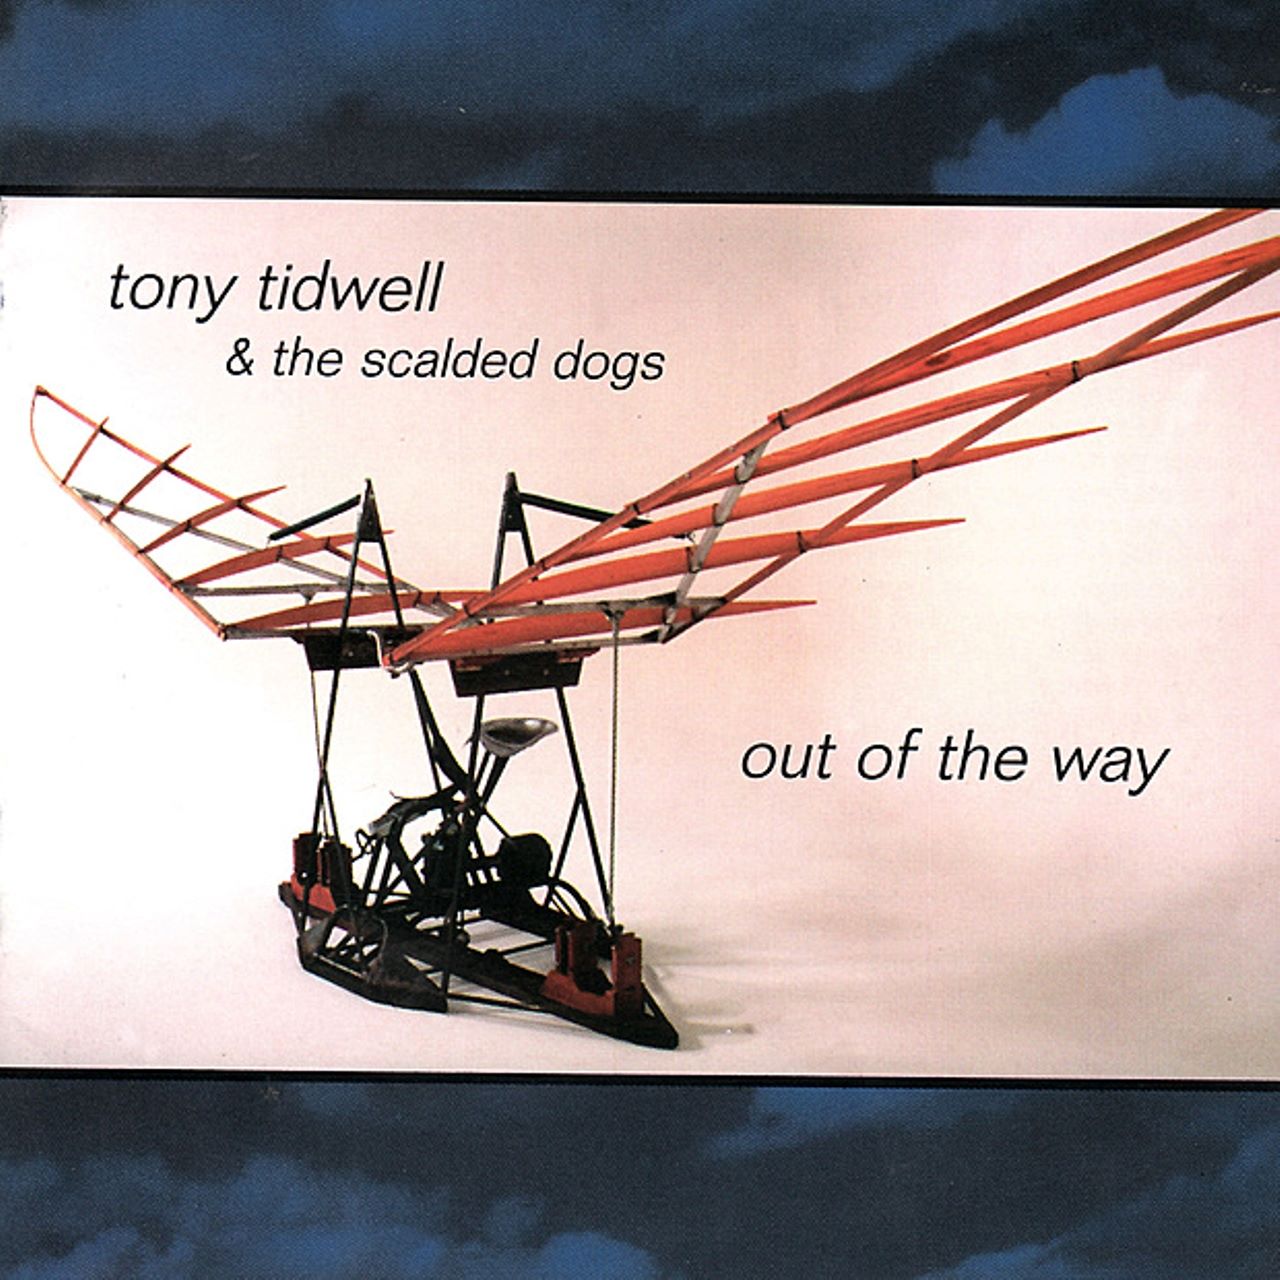 Tony Tidwell & The Scalded Dogs – Out Of The Way cover album